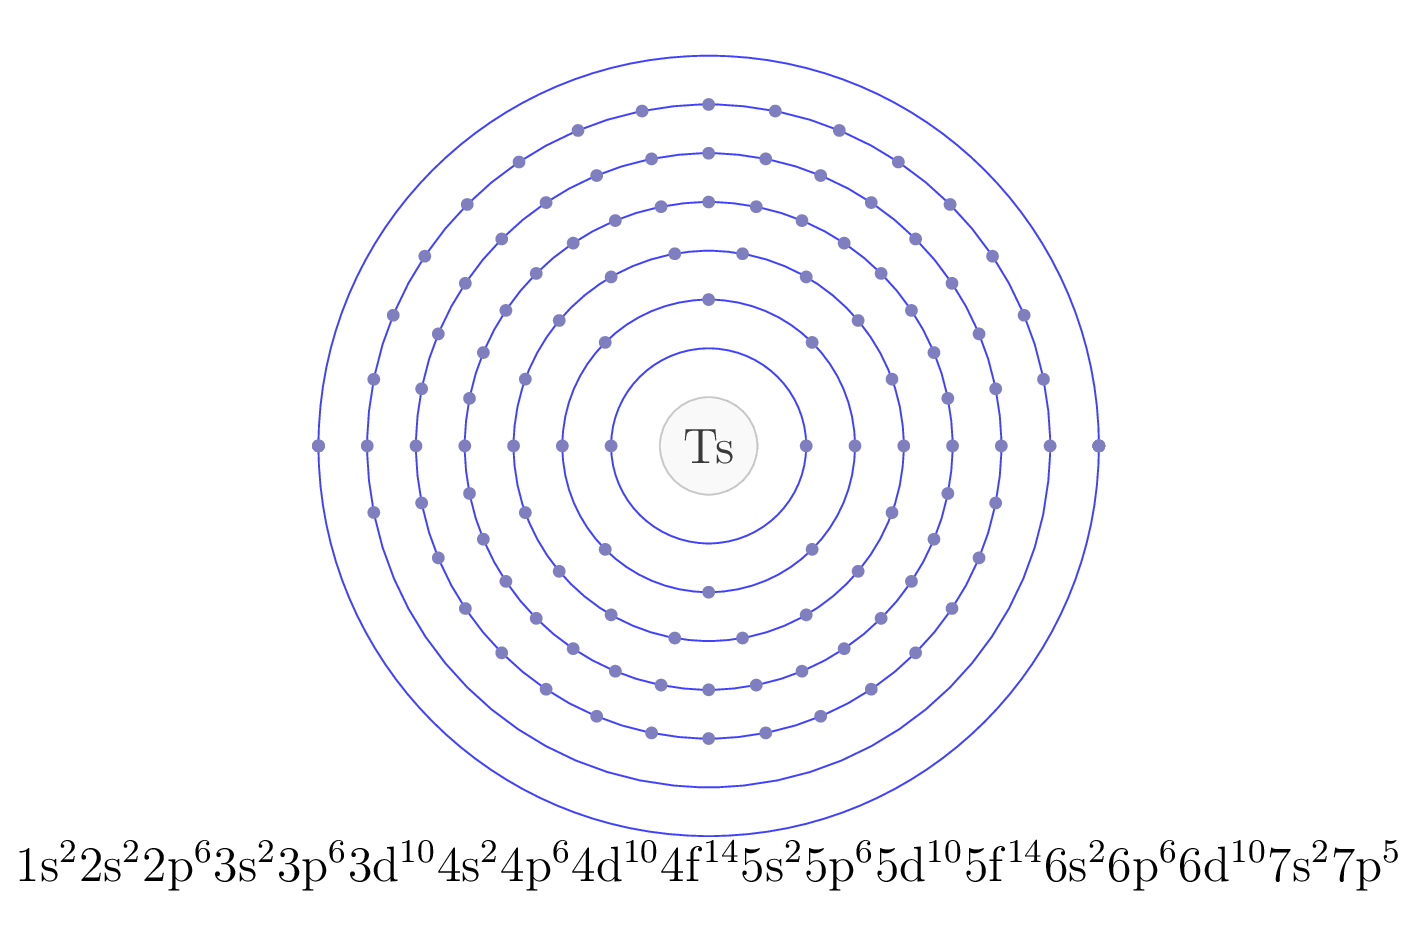 electron configuration of element Ts